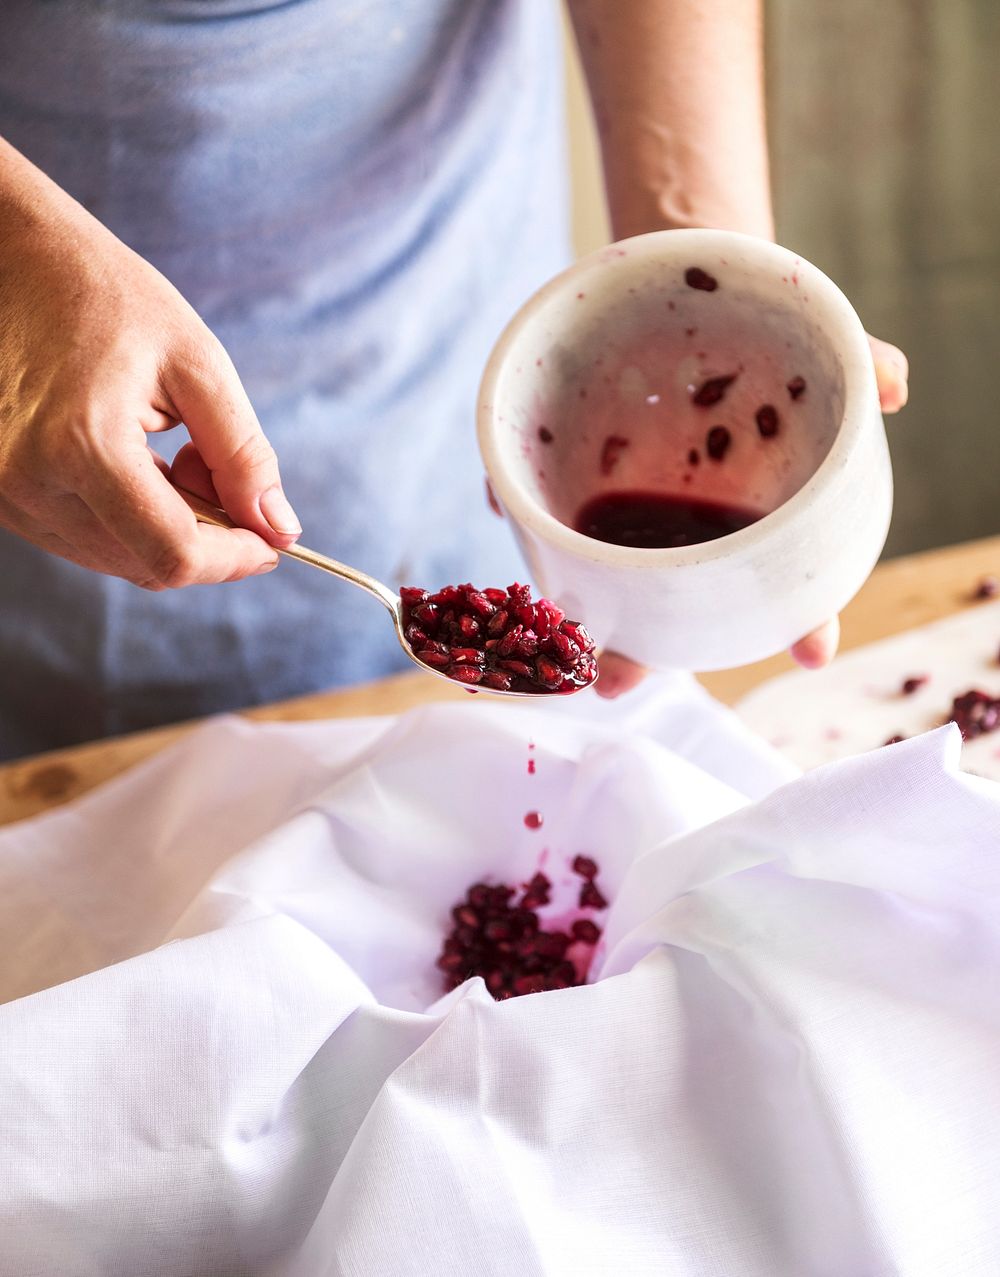 Baker separating juice from pomegranate seeds